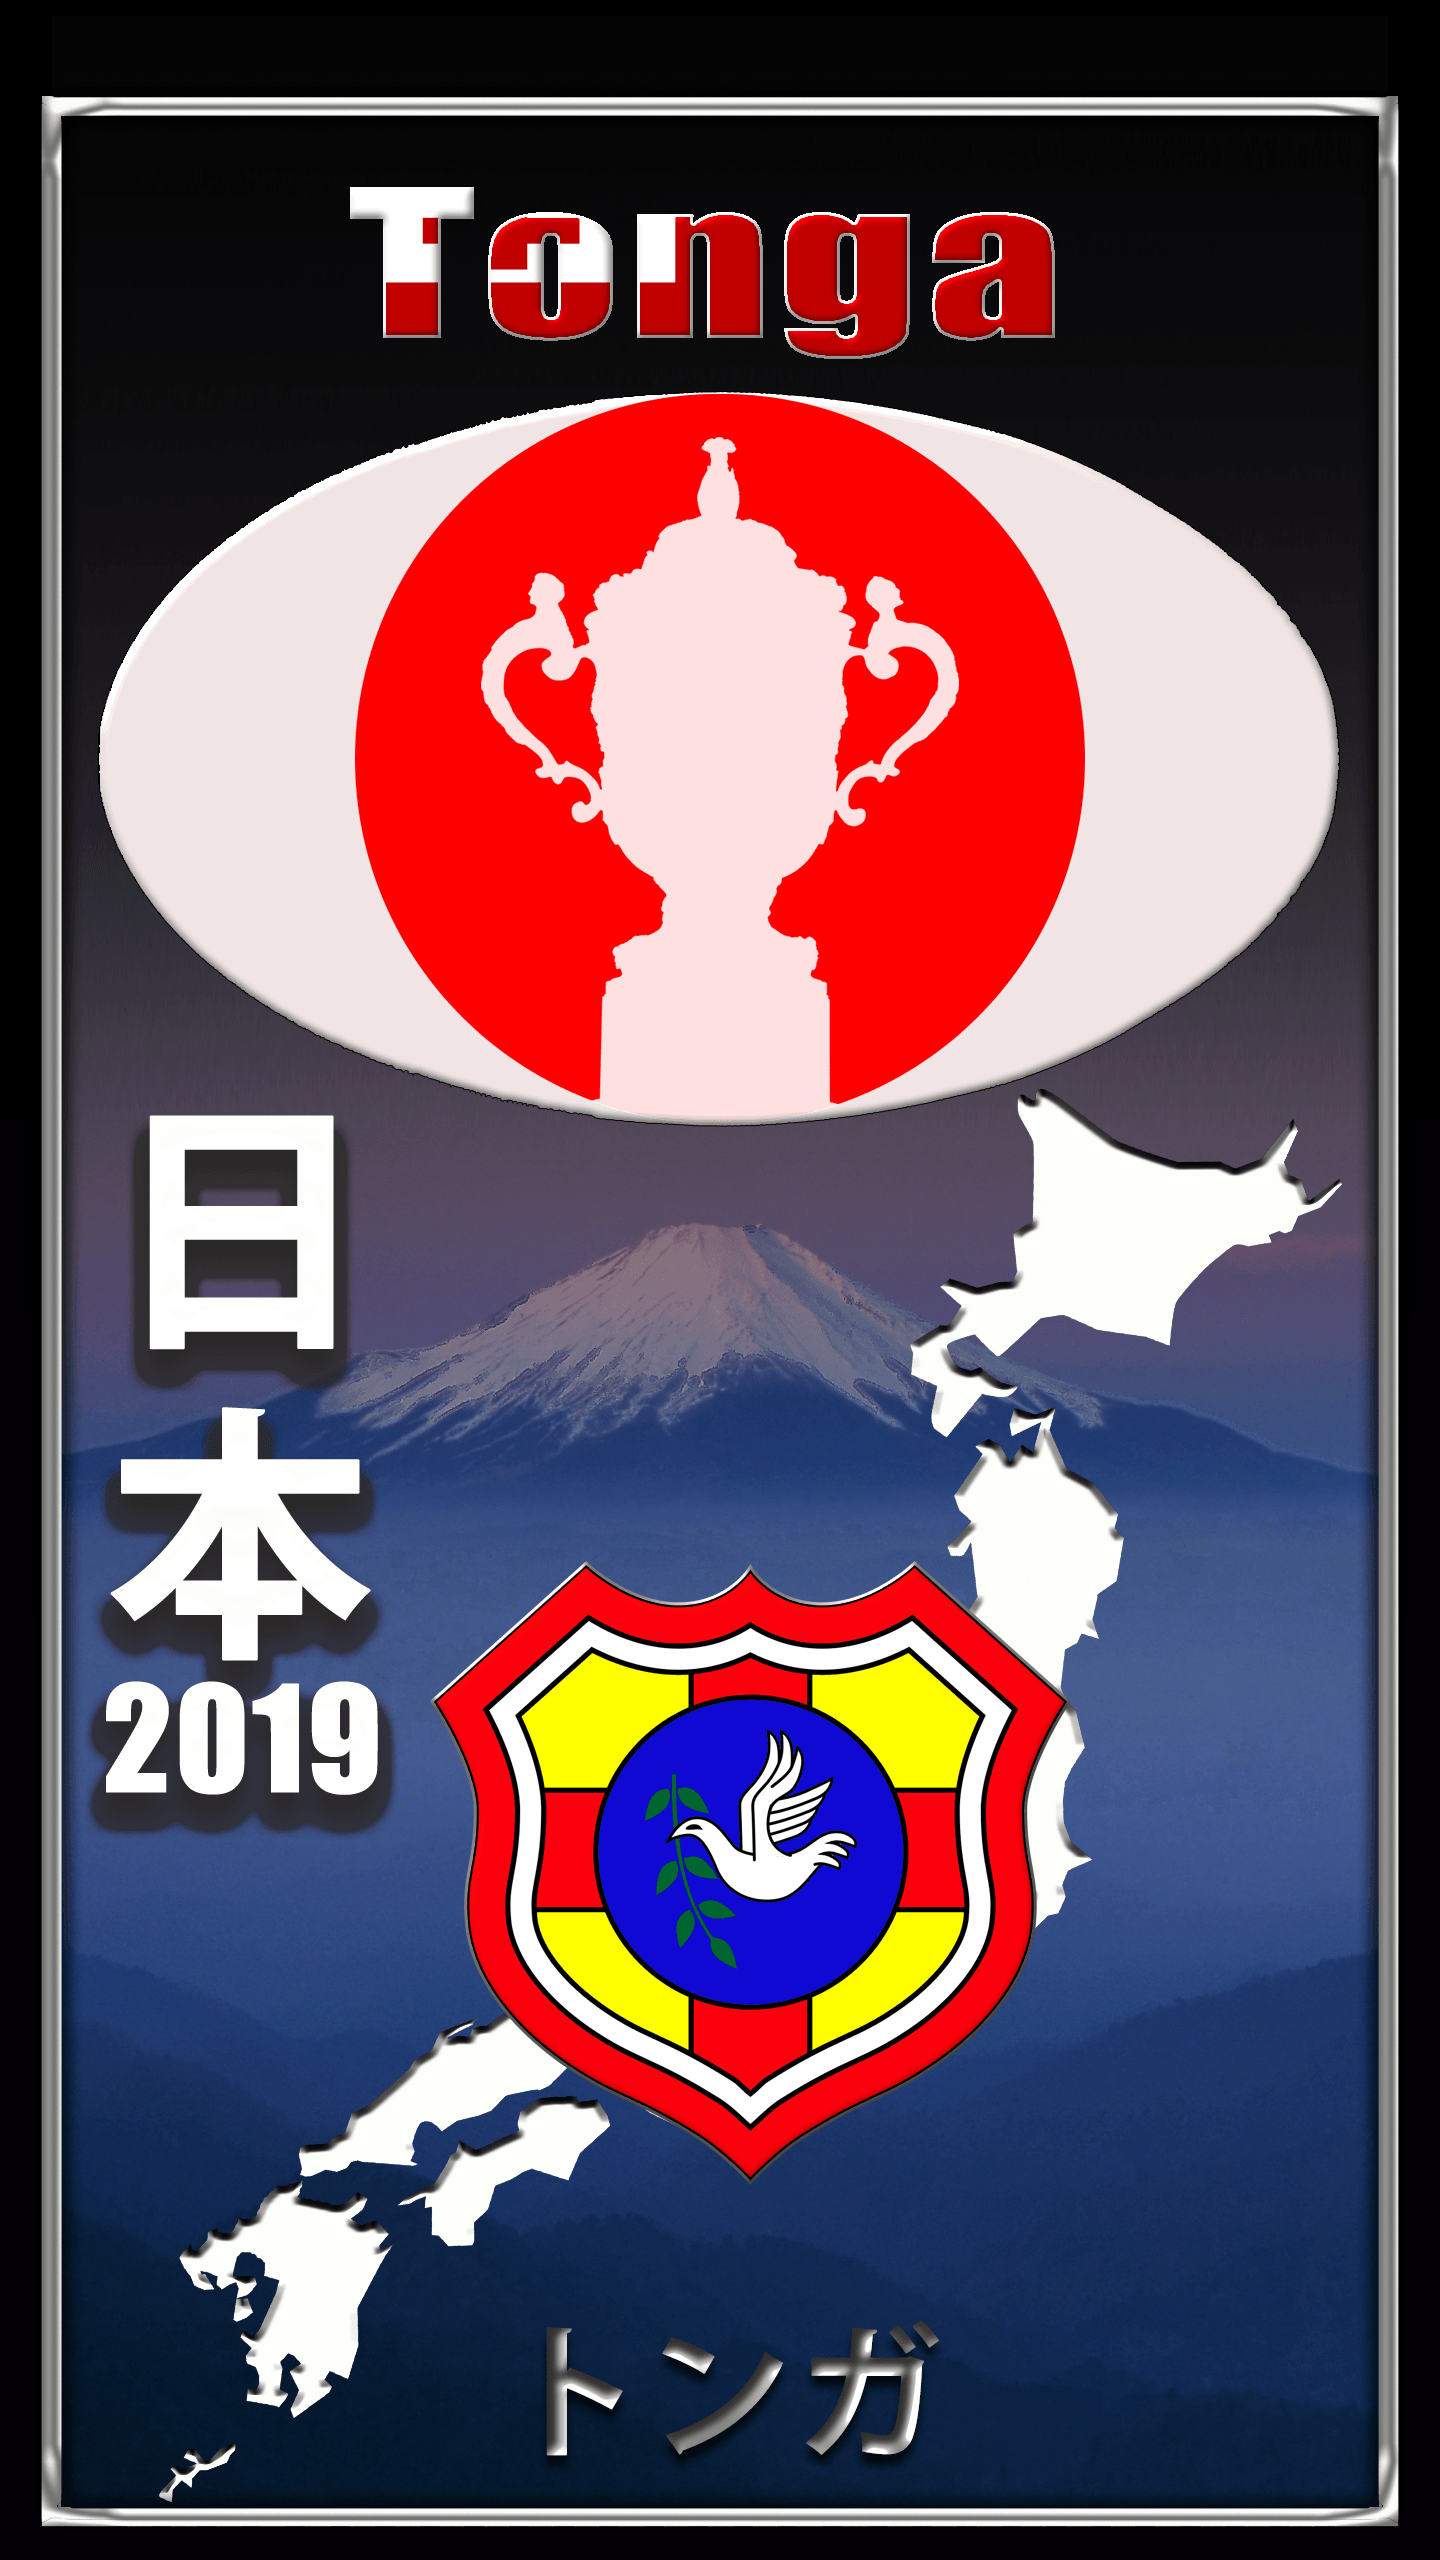 Tonga 2019 Rugby World Cup Japan. Wallpaper for Samsung